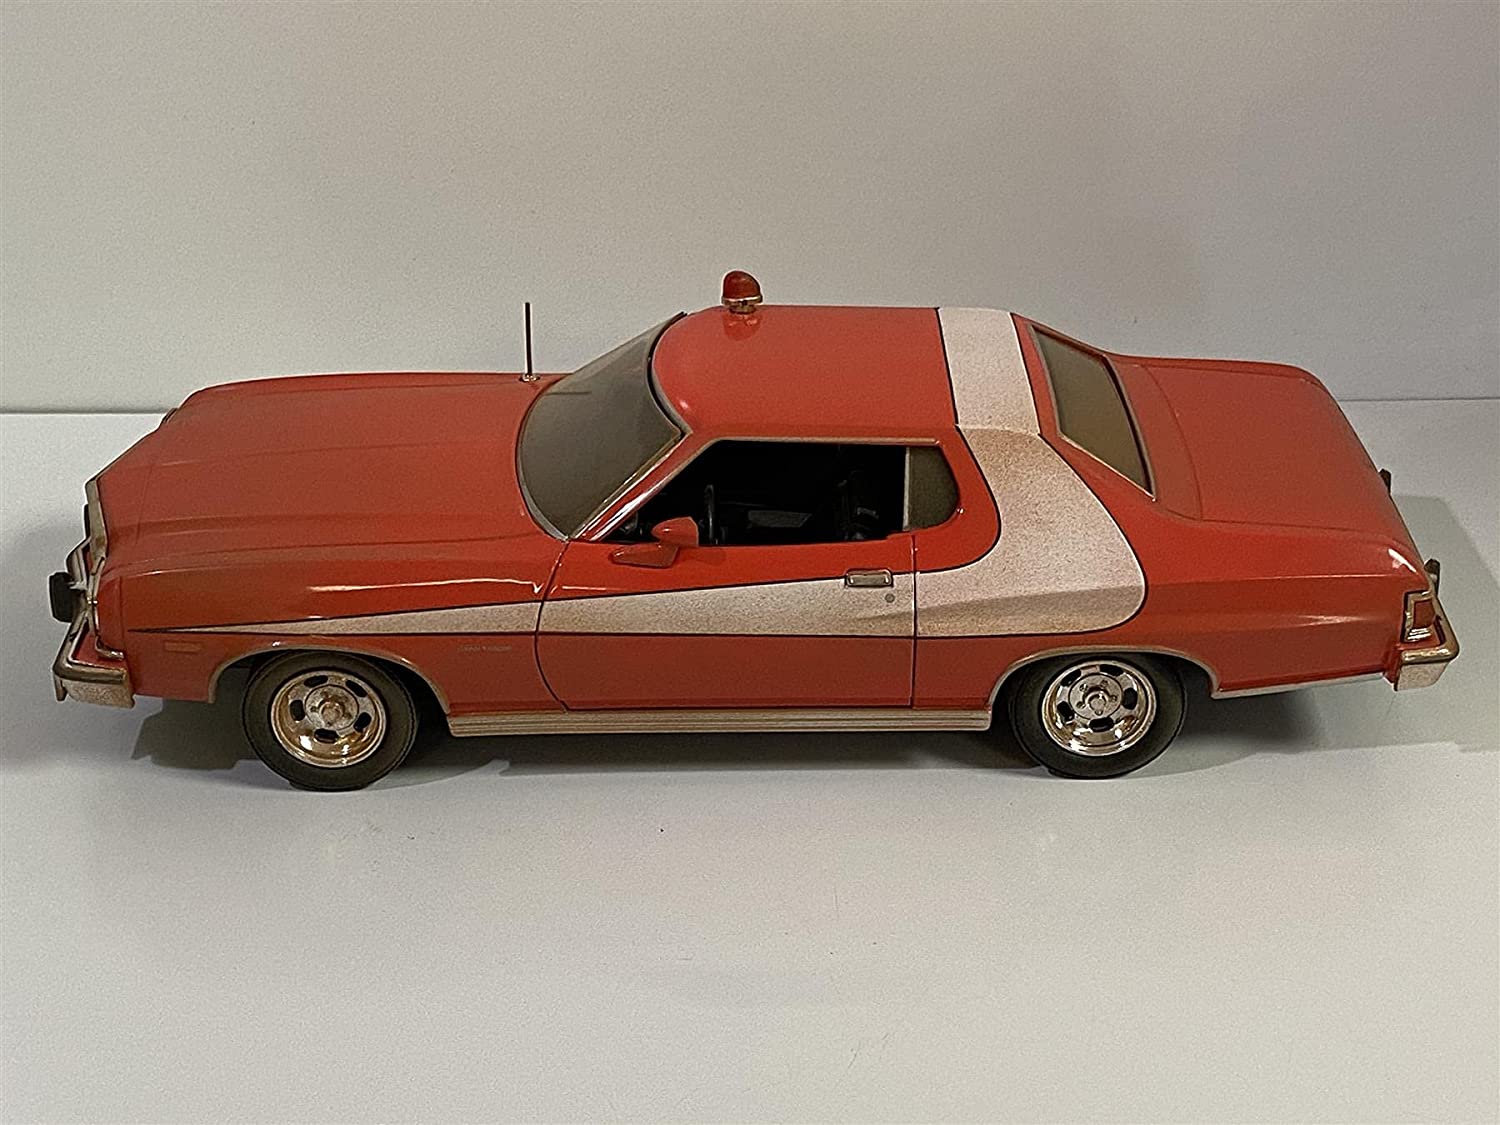 Starsky & Hutch 1976 Grand Torino - Weathered Look 1:24 Scale Die Cast Model